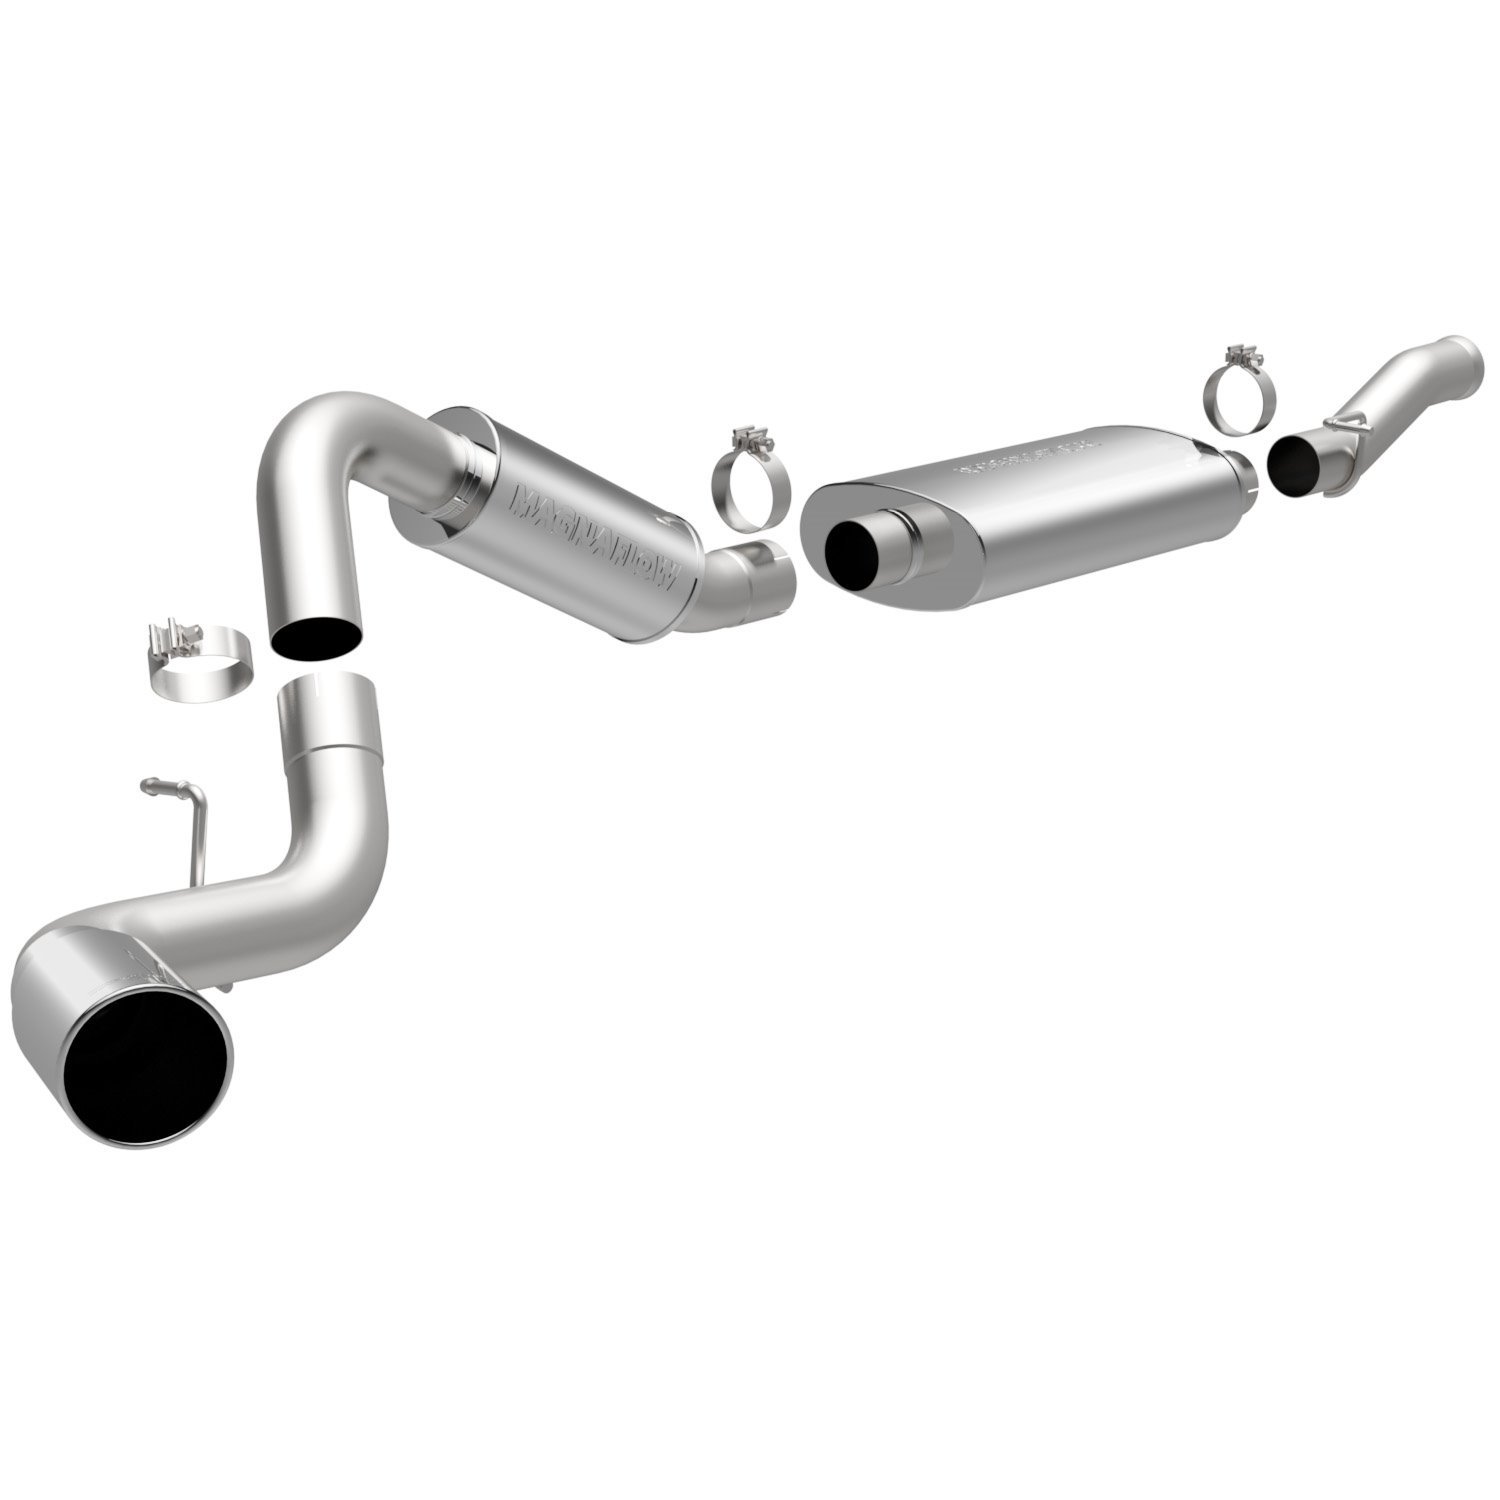 MF Series Cat-Back Exhaust System 2011-2013 Chevy Suburban 2500 6.0L V8